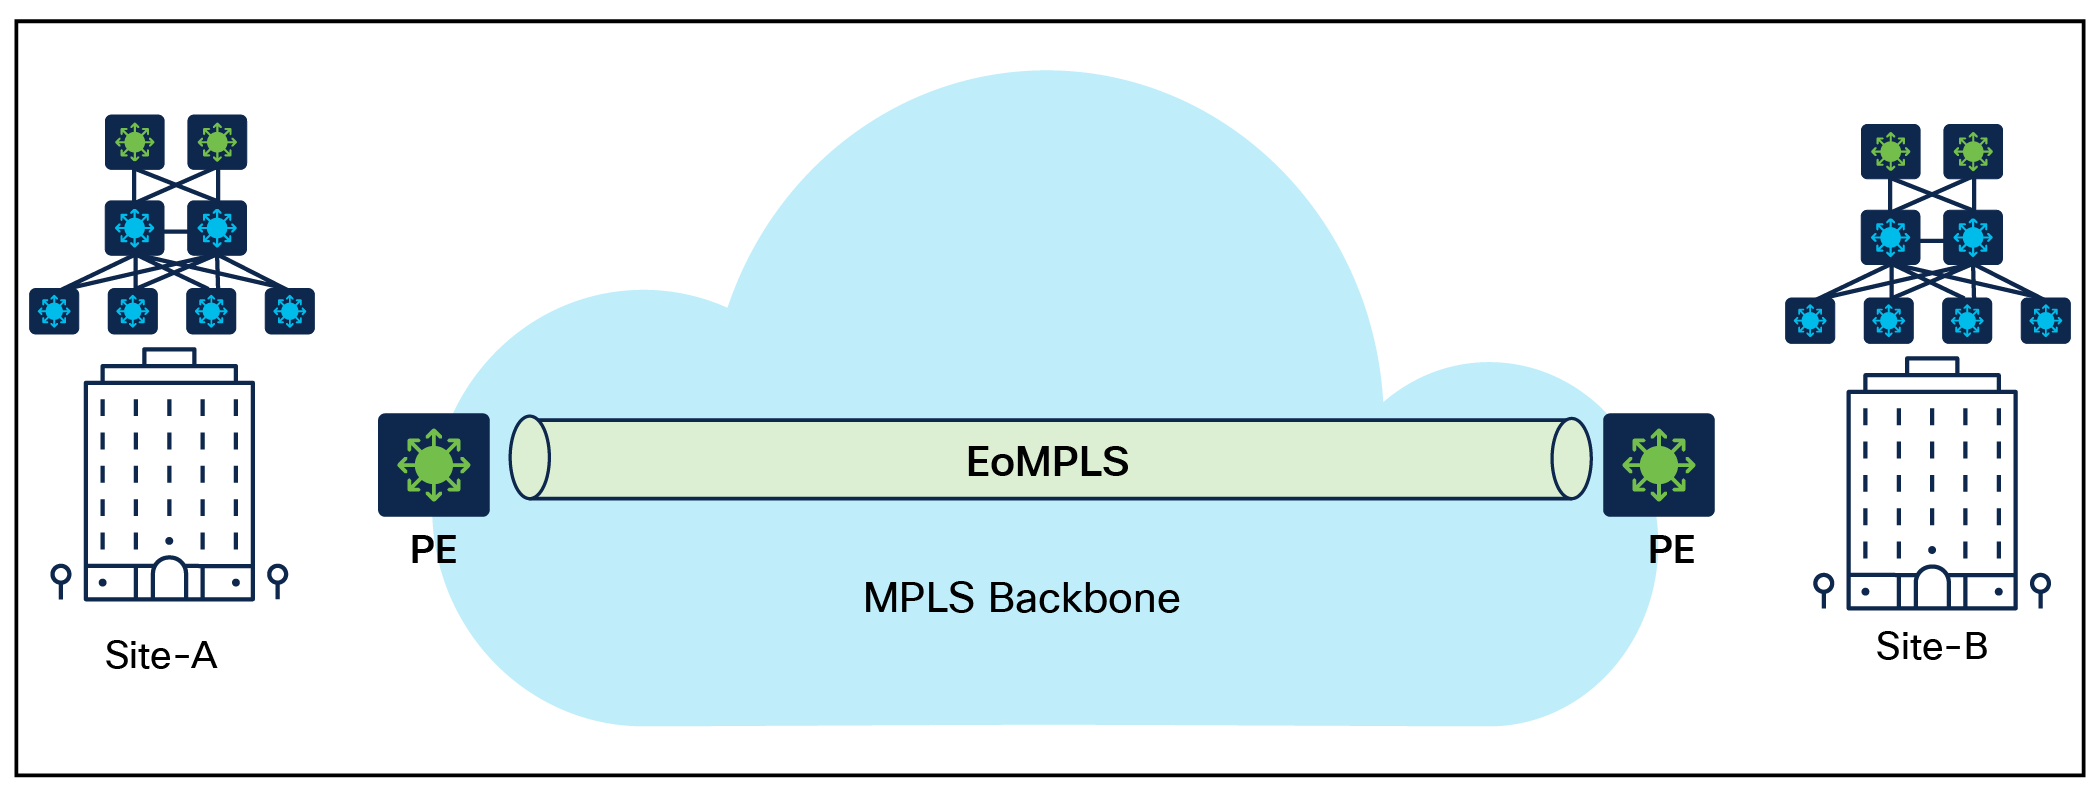 EoMPLS solution with point-to-point Layer 2 extension